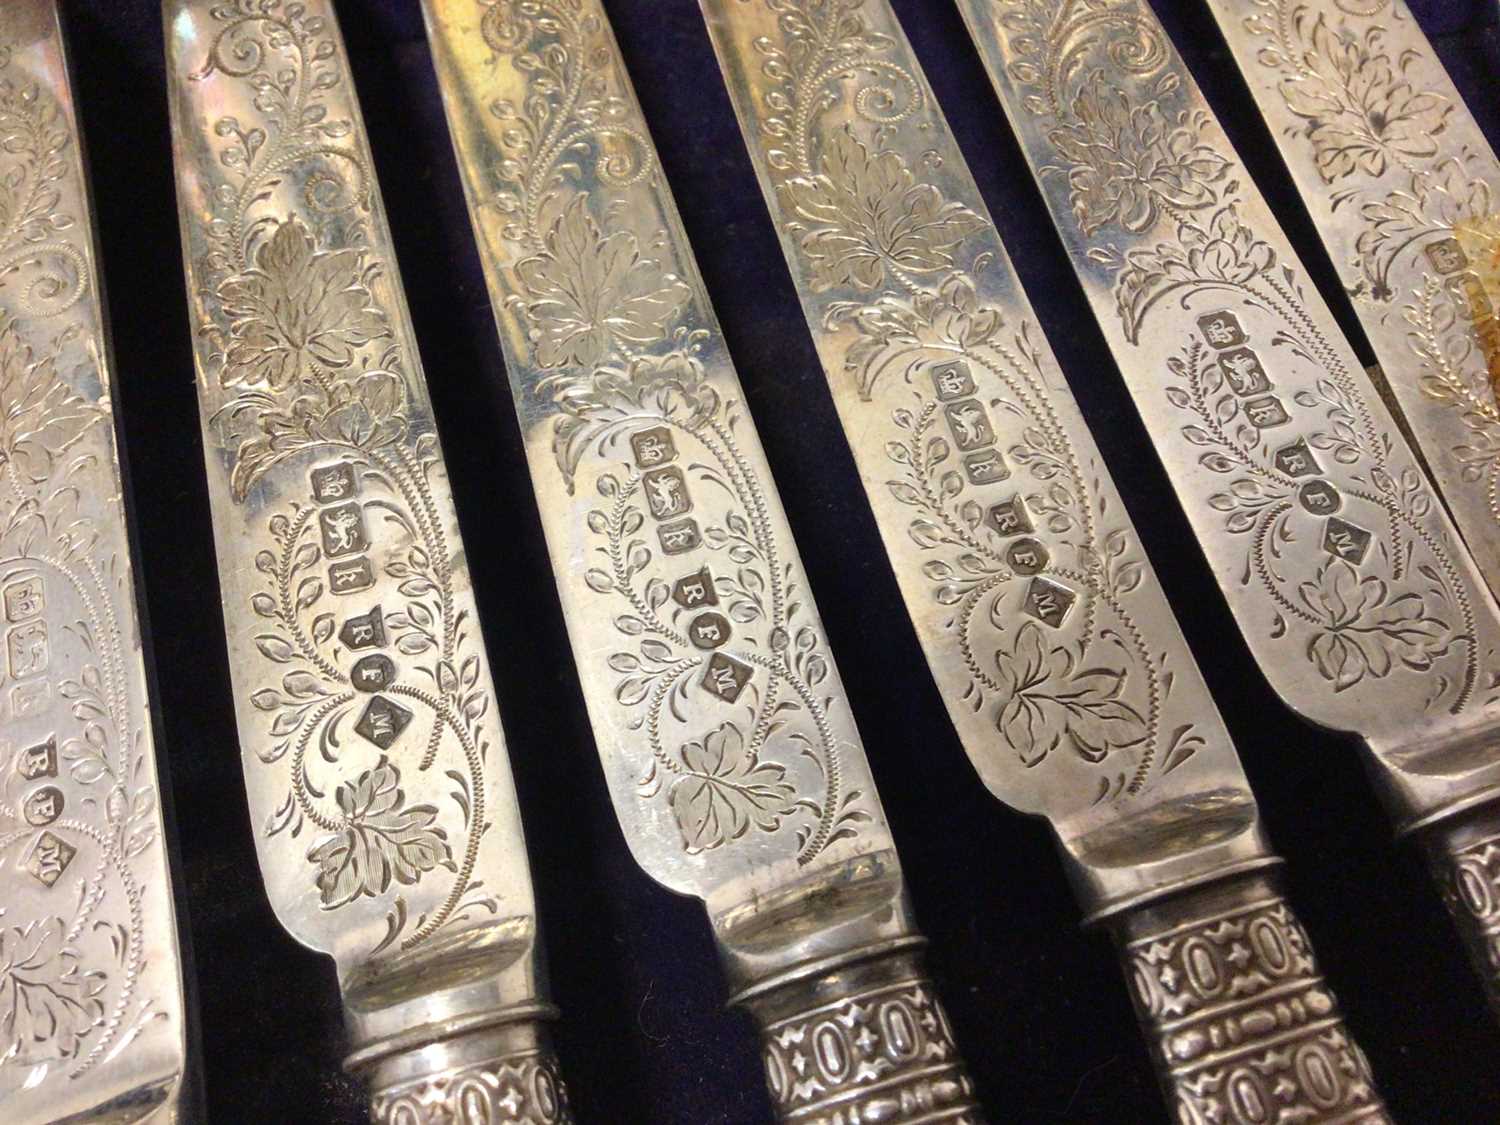 Cased set of 12 pairs of Edwardian silver and mother of pearl desert knives and forks - Image 4 of 5